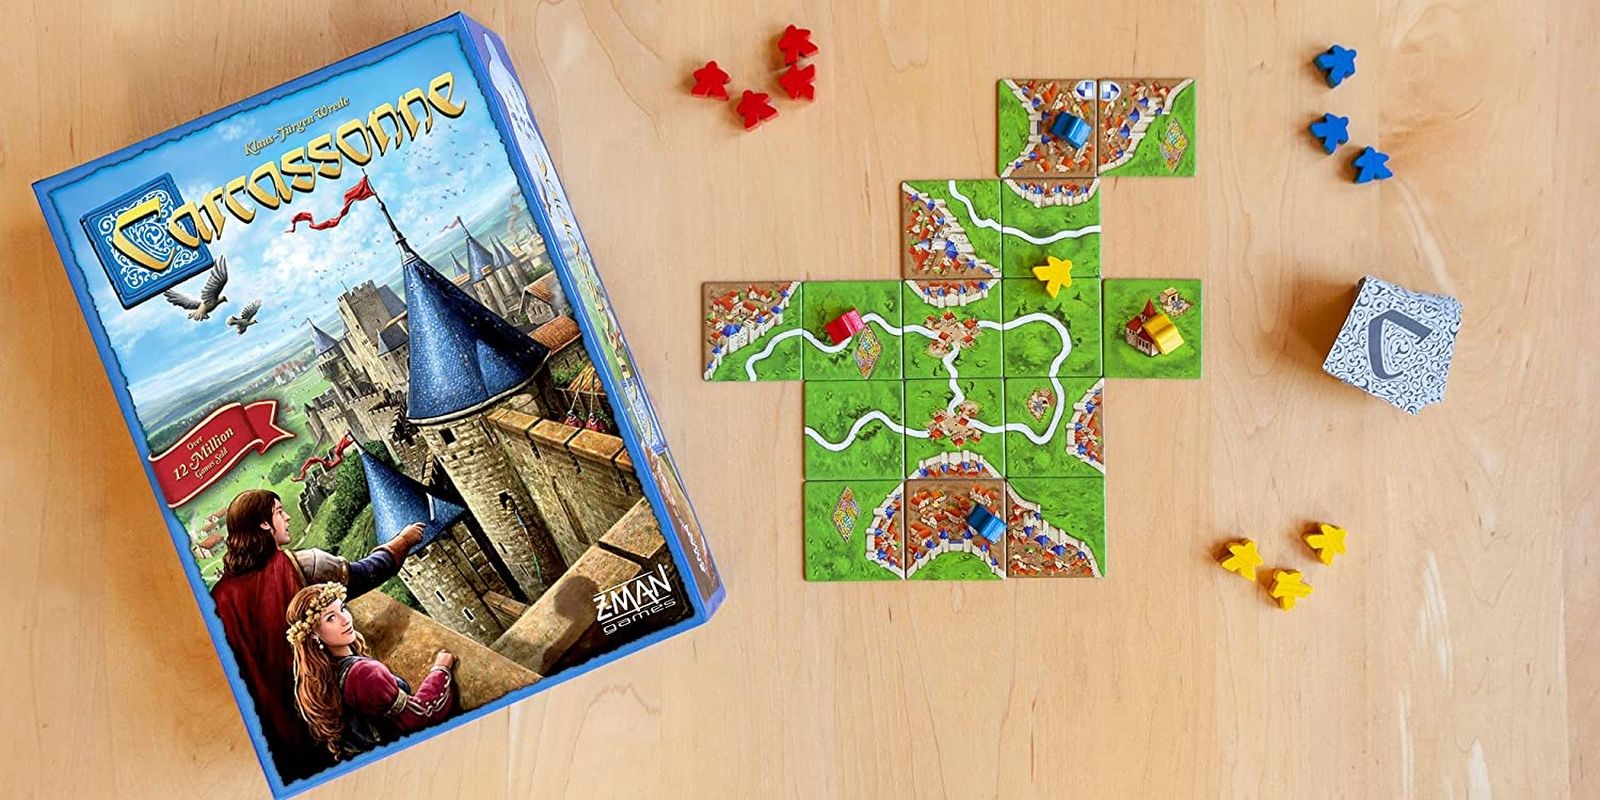 Some of the components of Carcassone board game.